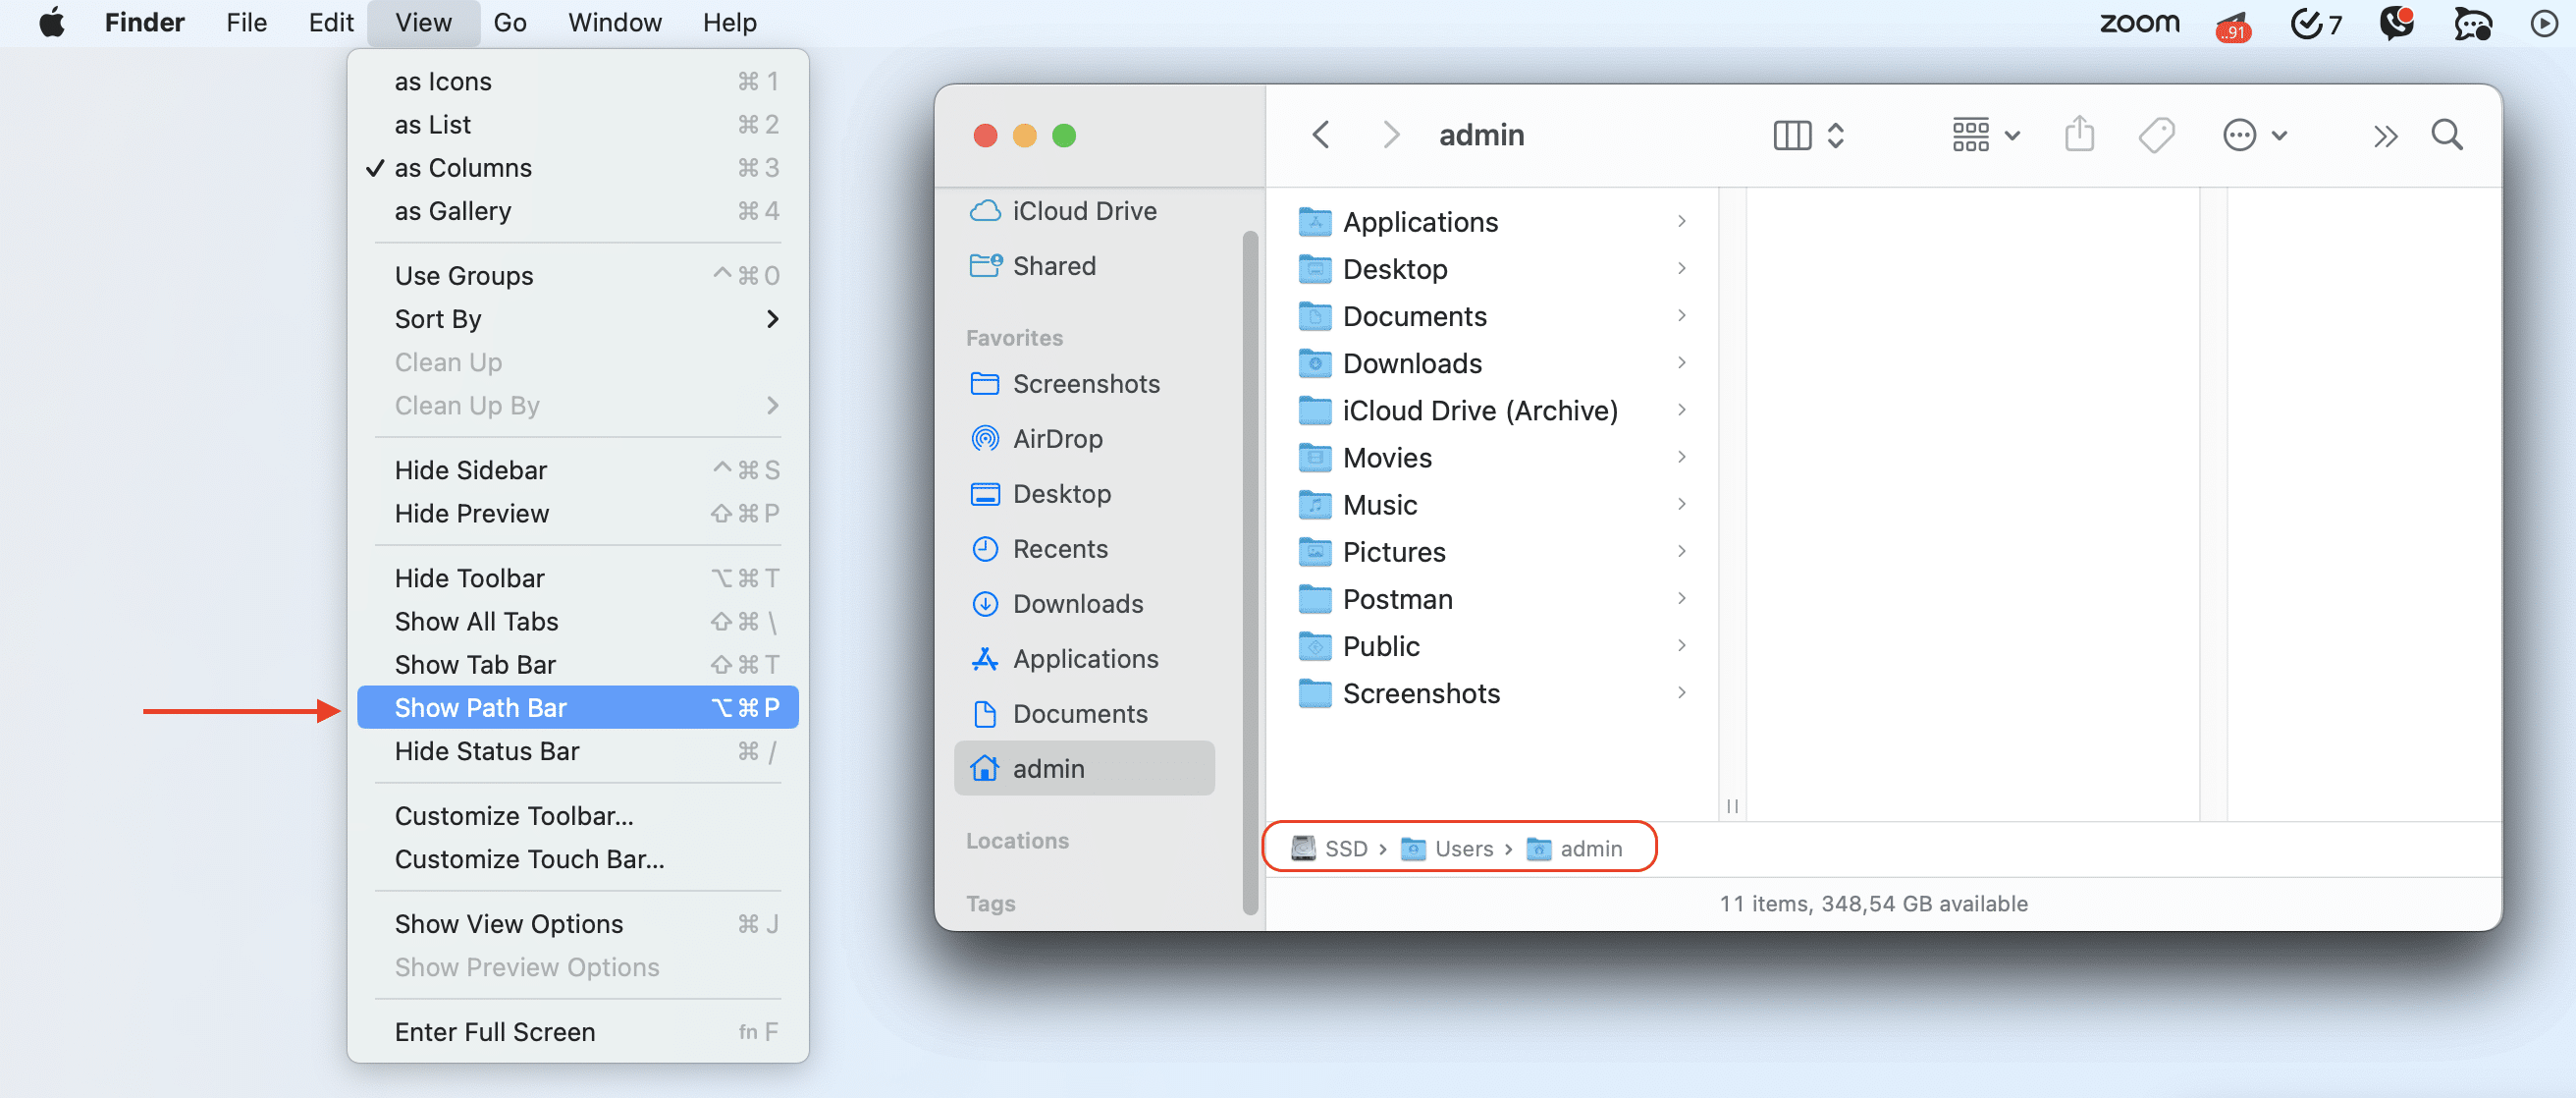 Show Folder Path option selected in Finder View menu